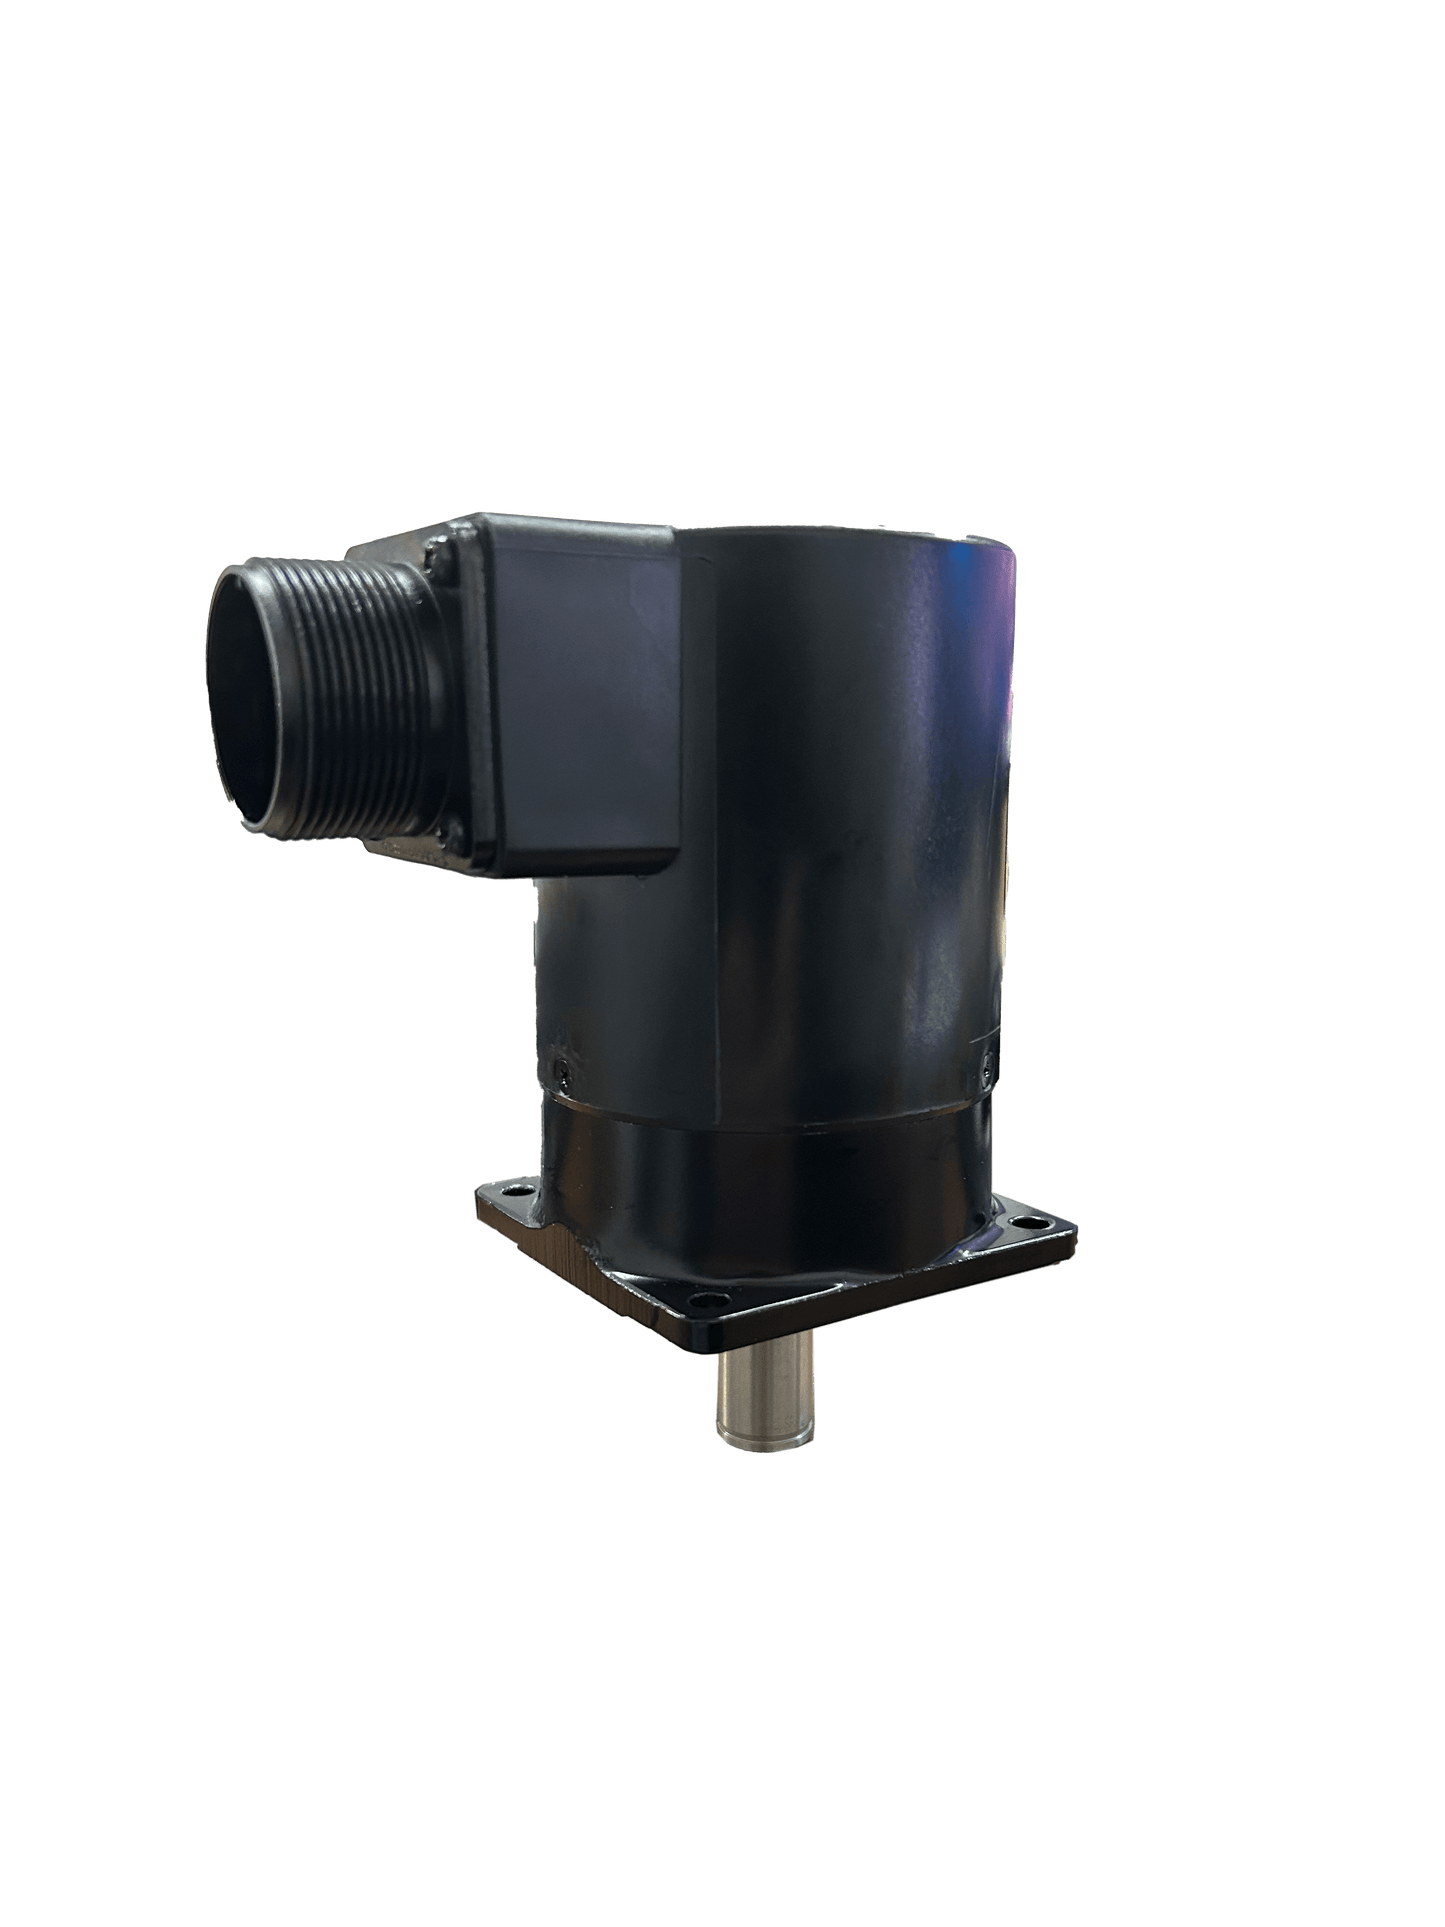 NW OUTBOARD ENCODER